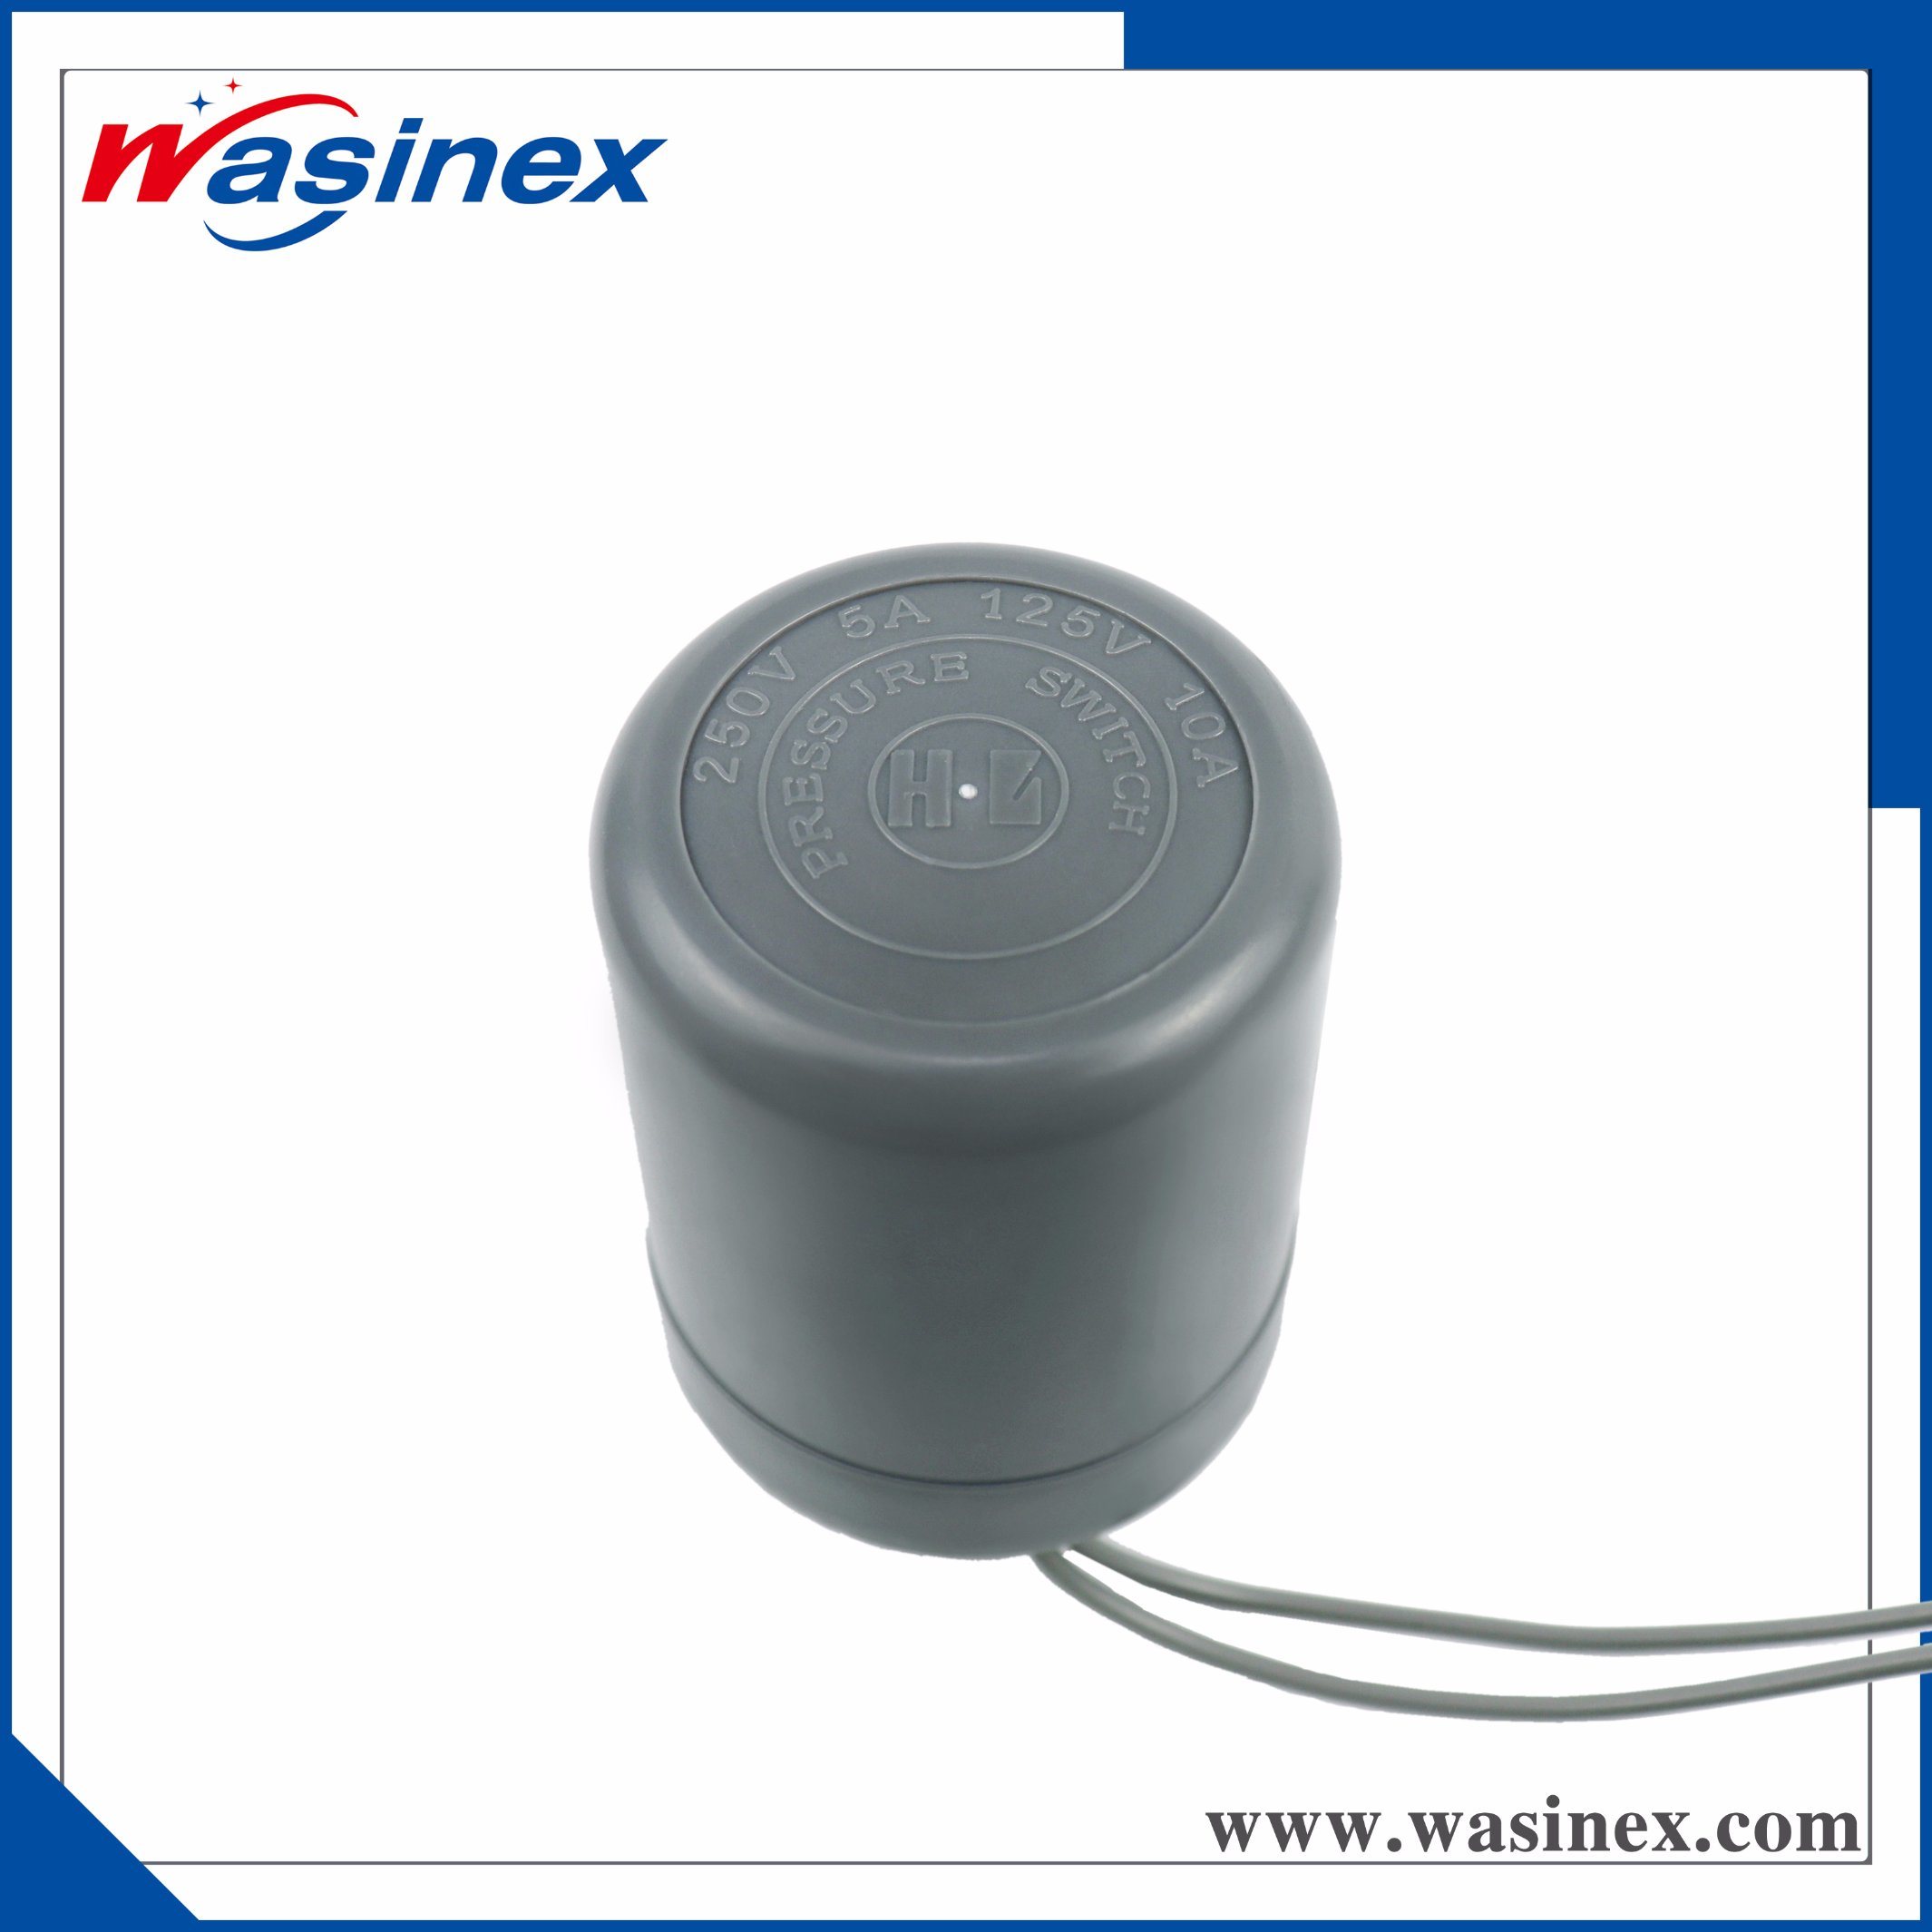 Wasinex Bsk-2 Mechanical Pressure Switch/Controller for Water Supply